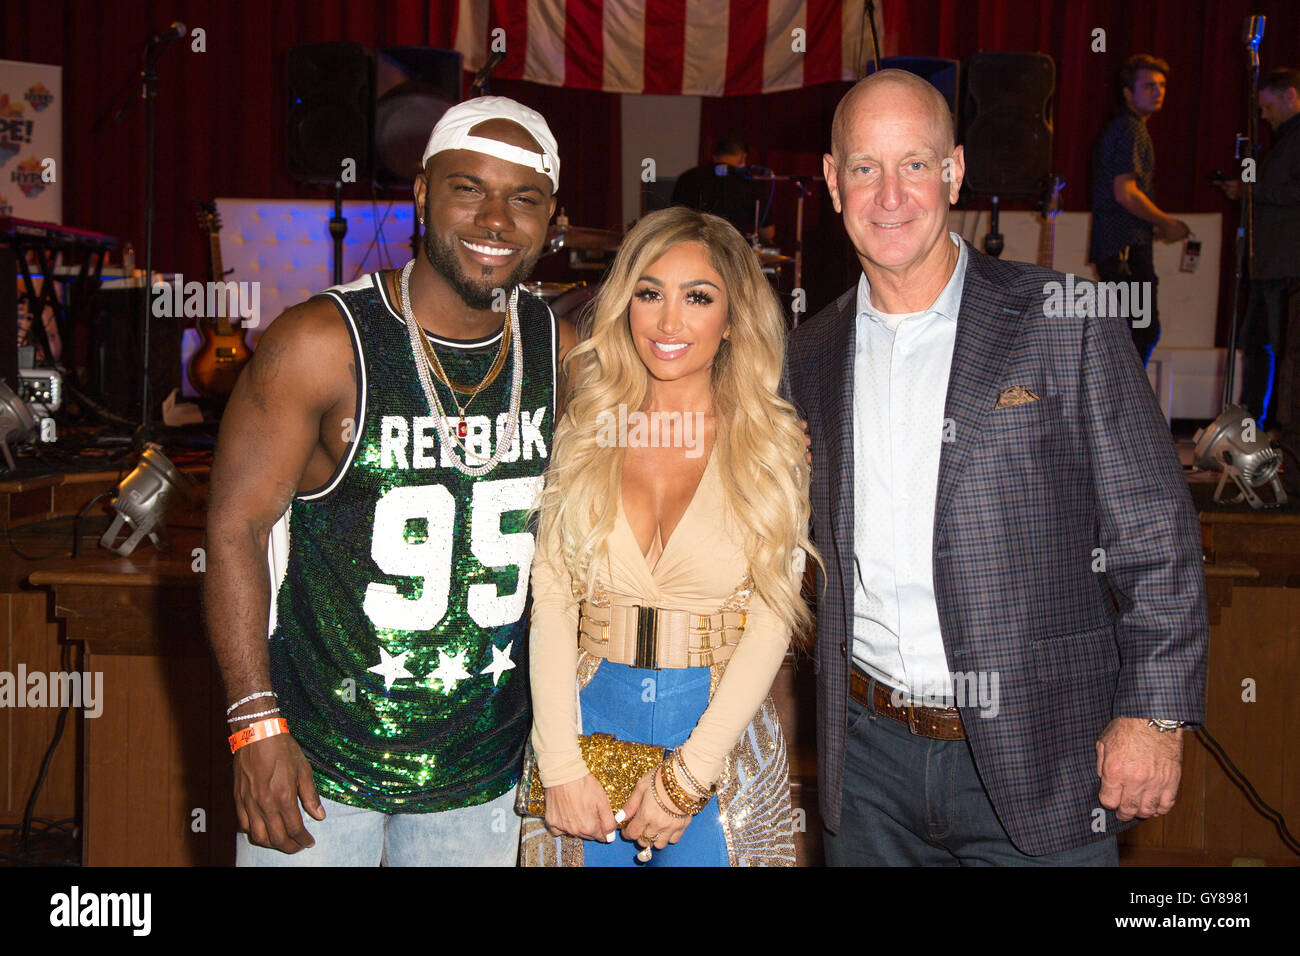 Hollywood, California, USA. 17th September, 2016. TV personality Milan Christopher, fashion designer Angel Brinks, and reality TV star Steve Cederquist of HGTV's 'Flip or Flop' TV show, attend the InTouch Magazine's Celebrity Fan Festival Pre-Emmy's Party at the Hollywood Foreign Legion Hall in Hollywood, California. Credit:  Sheri Determan / Alamy Live News Stock Photo